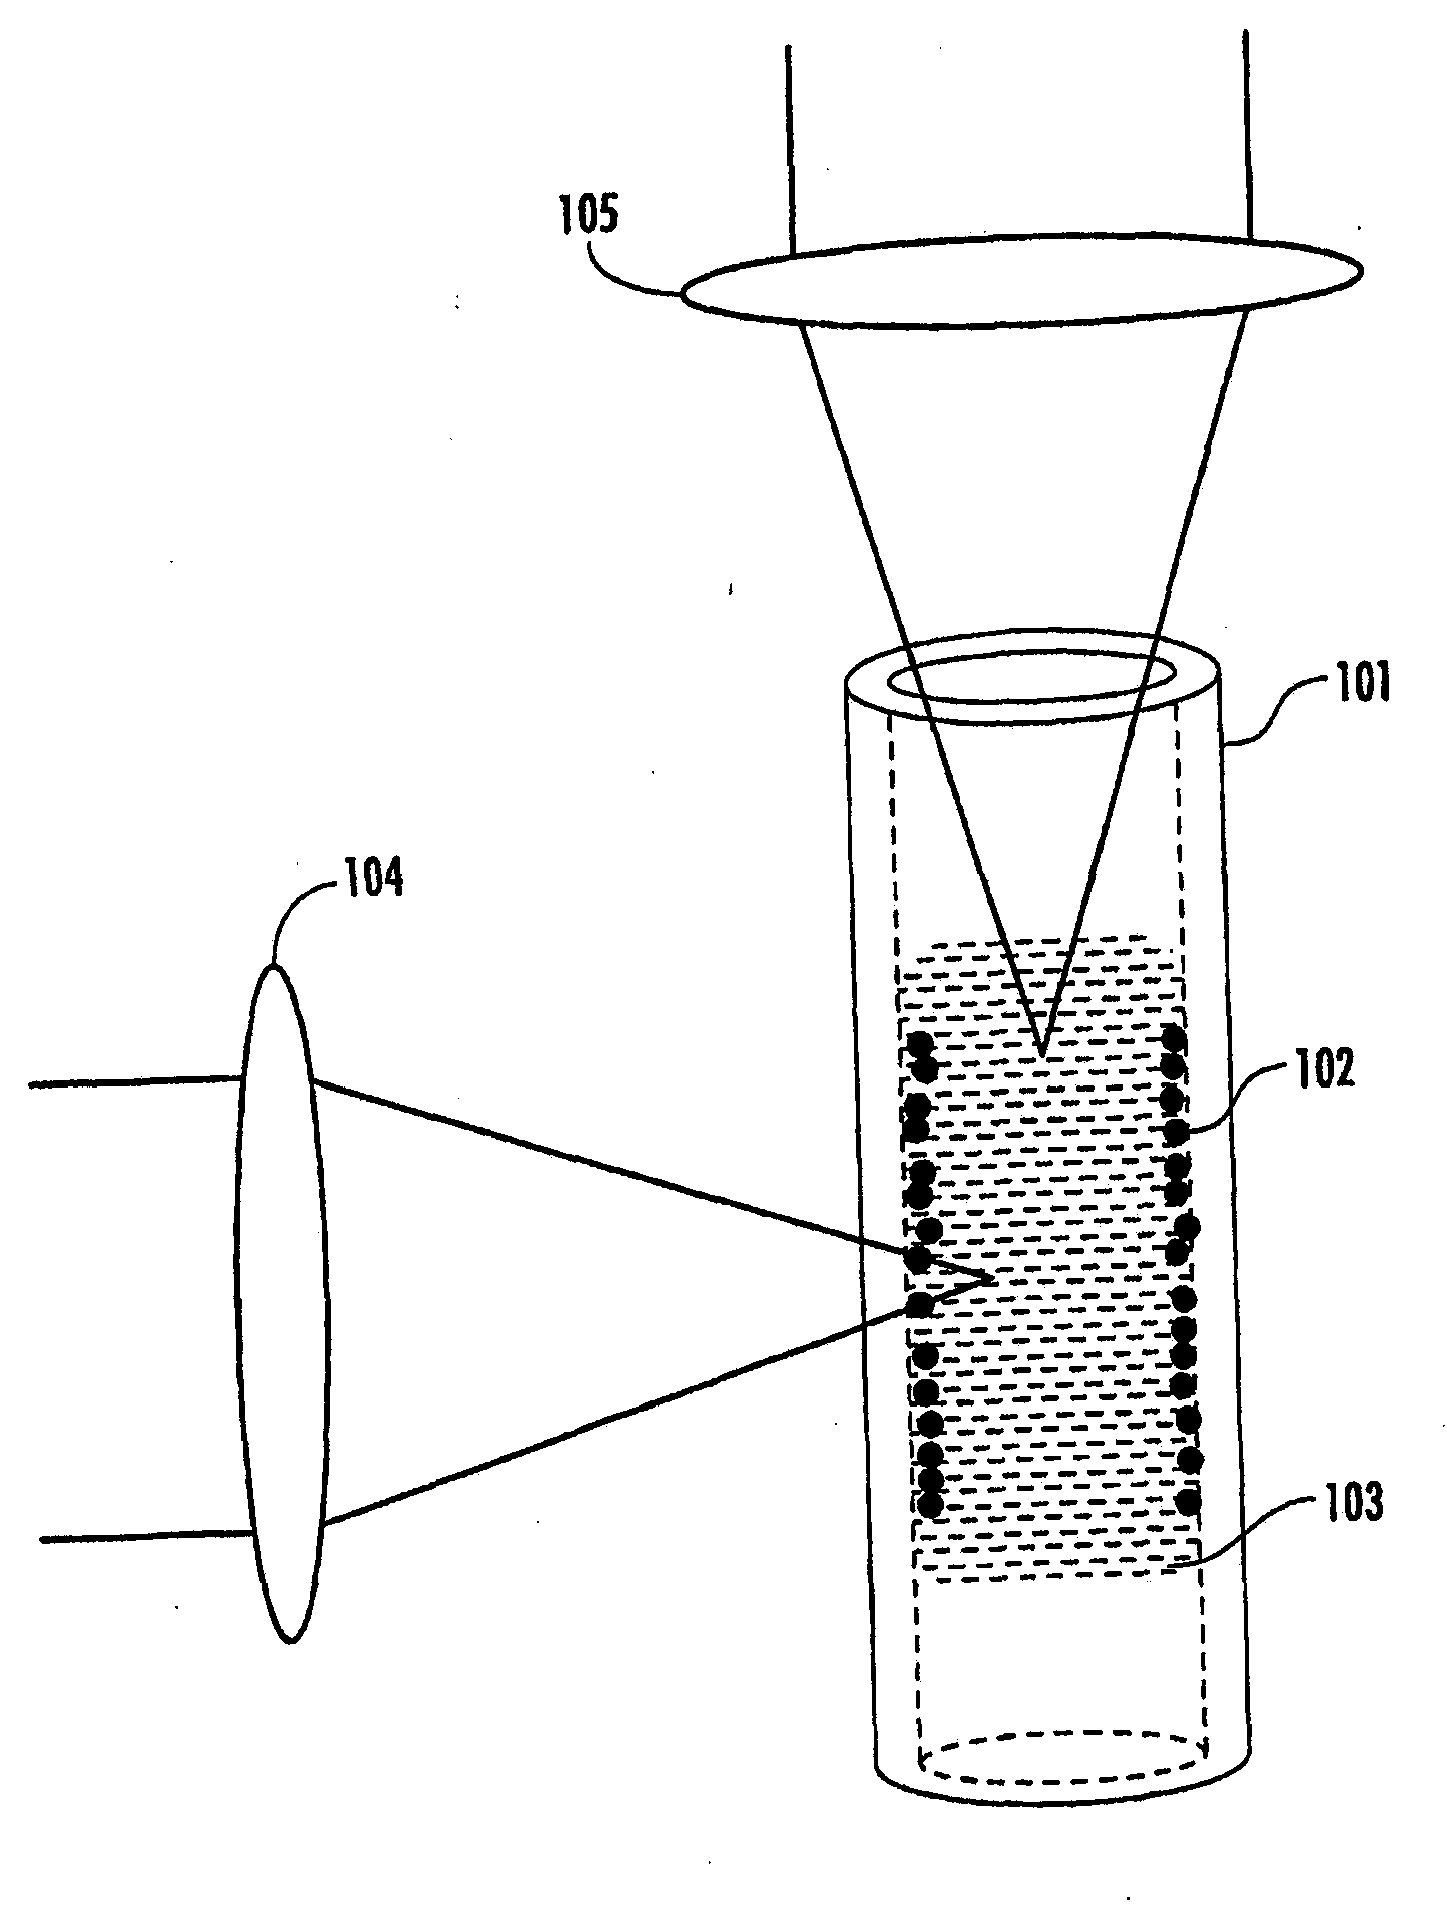 Surface-enhanced Raman scattering apparatus and methods